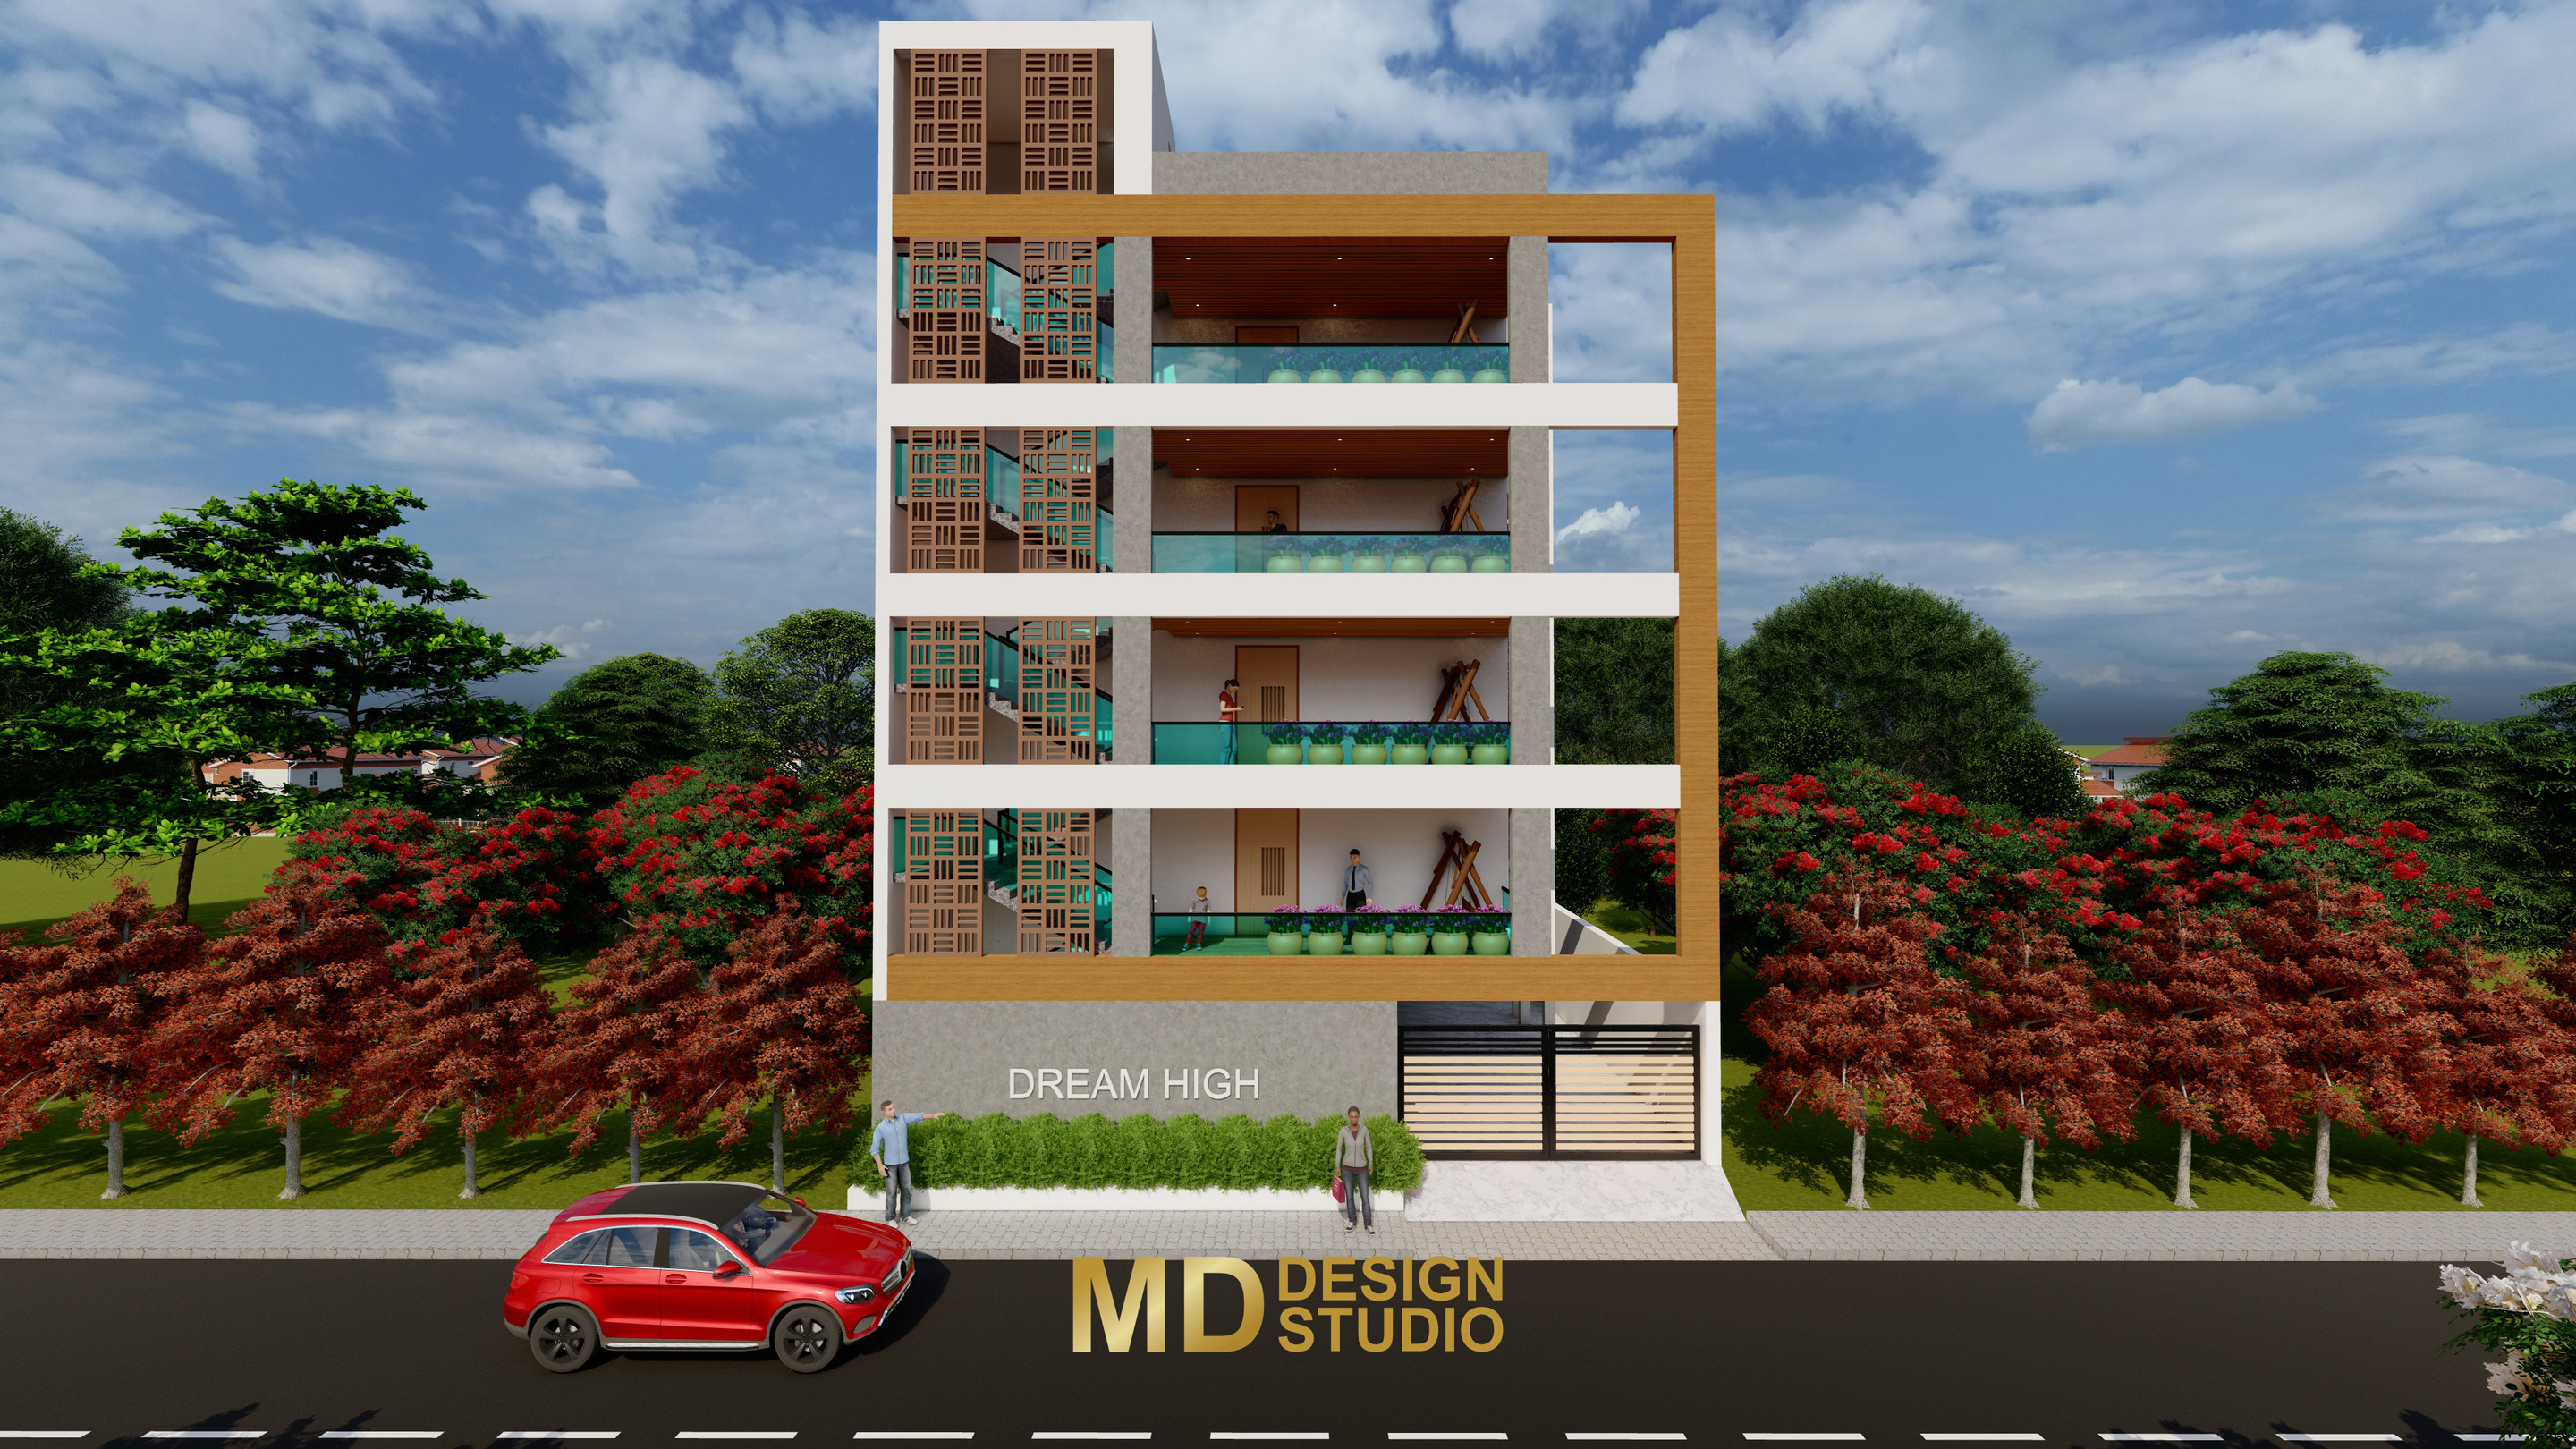 Residential Building Architectural Design Services By MD Design Studio